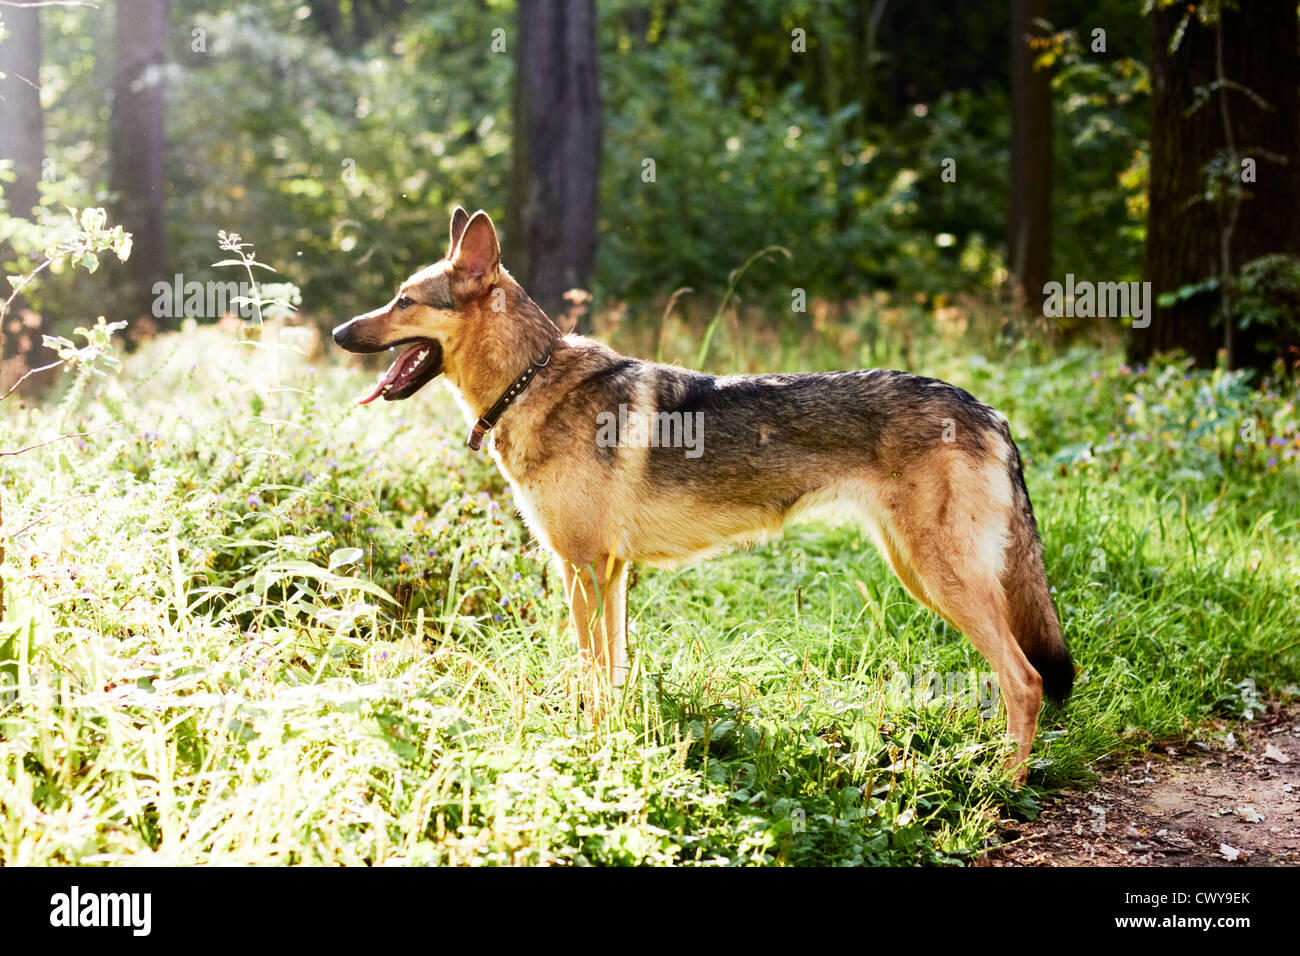 Dog listening with interest to the sounds of the woods. Stock Photo